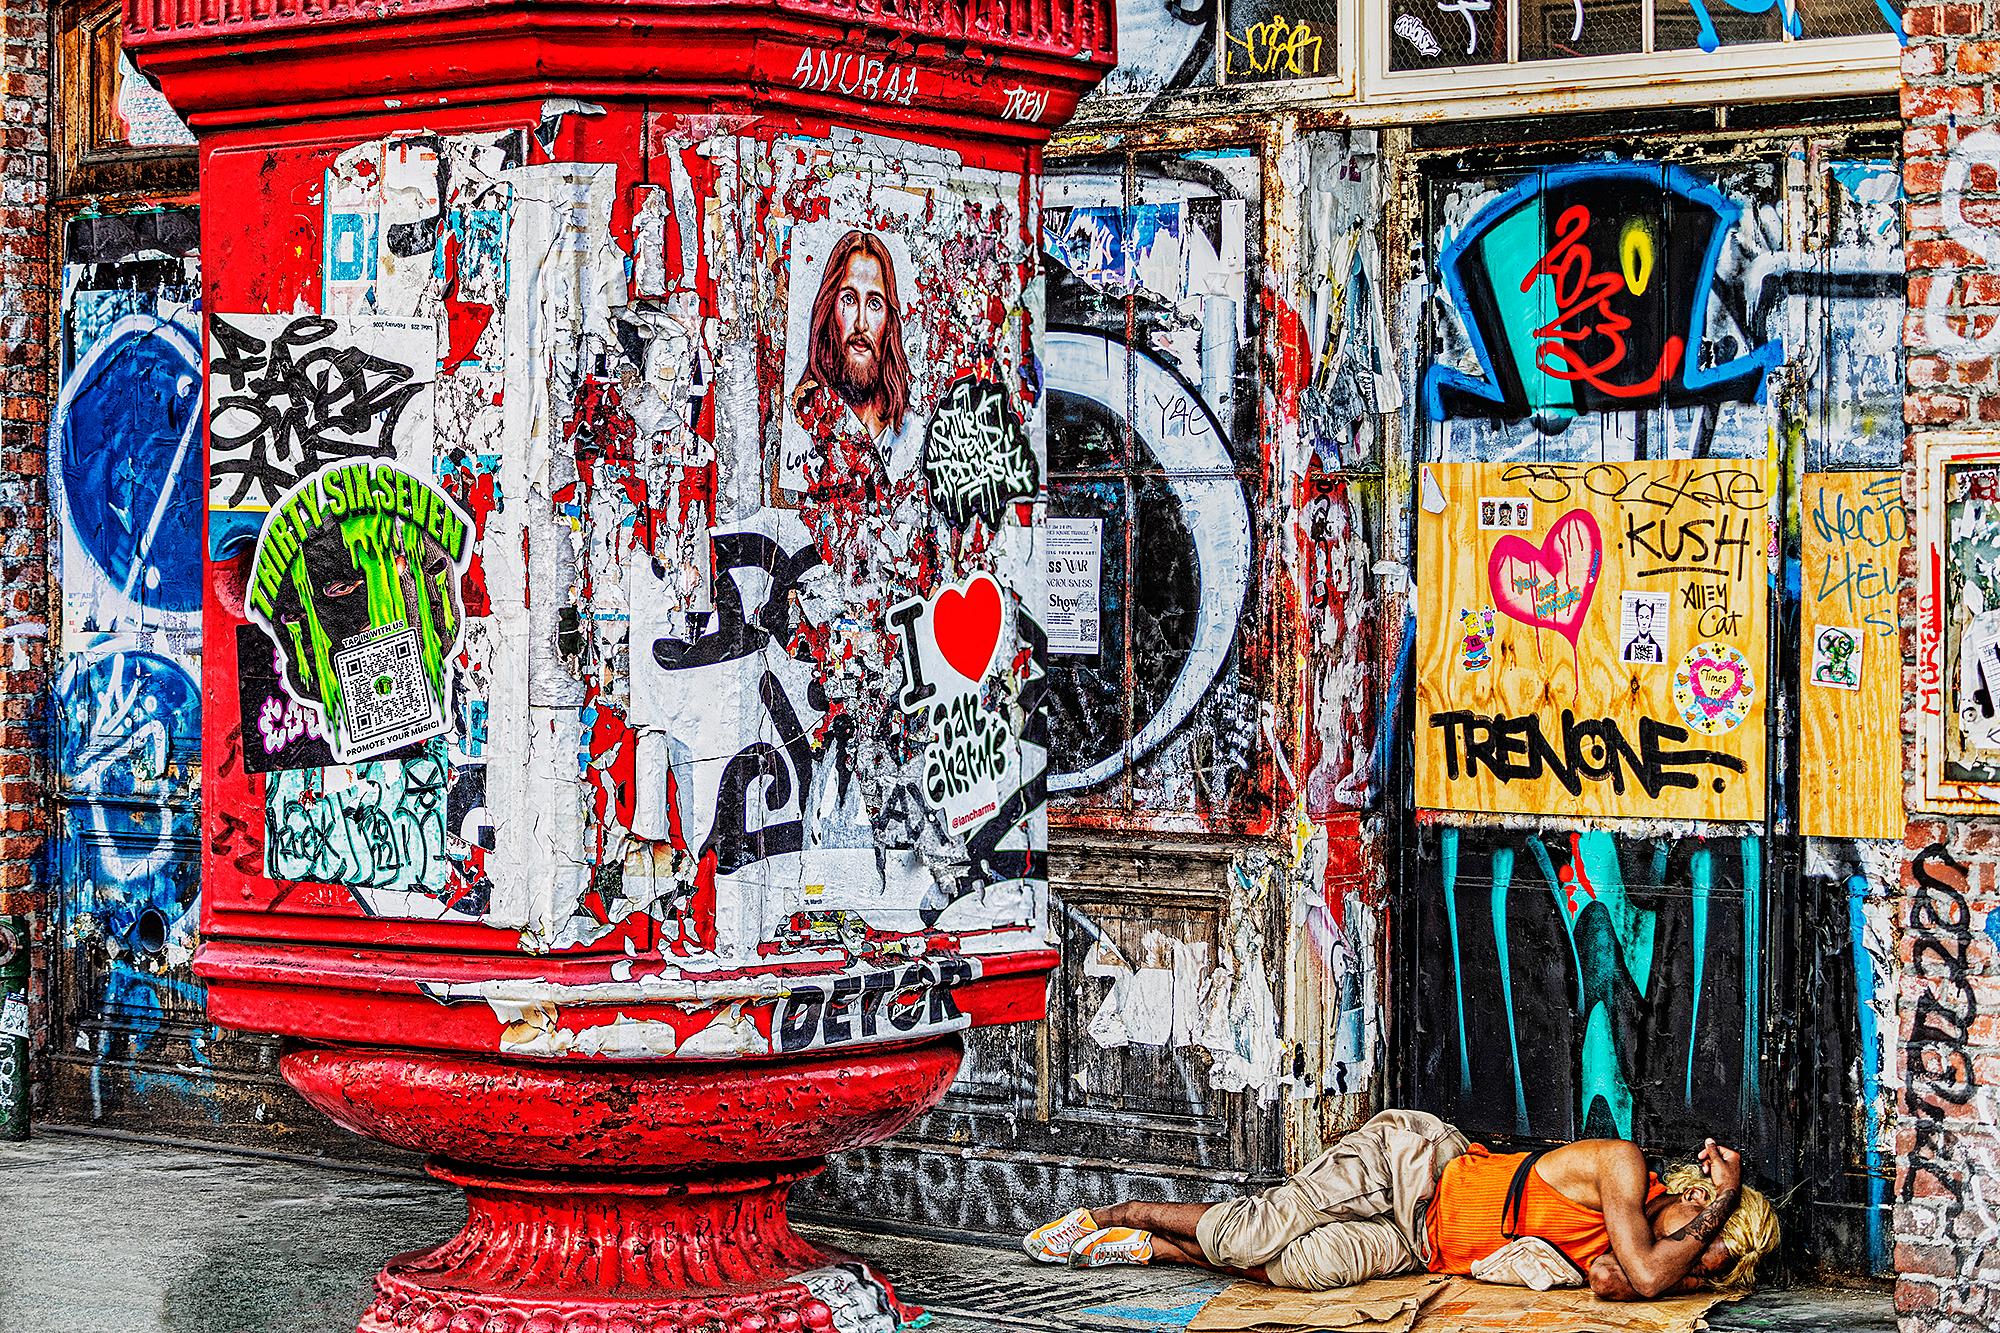 Mitchell Funk Abstract Photograph - Bowery Street Scene with Abstract Graffiti